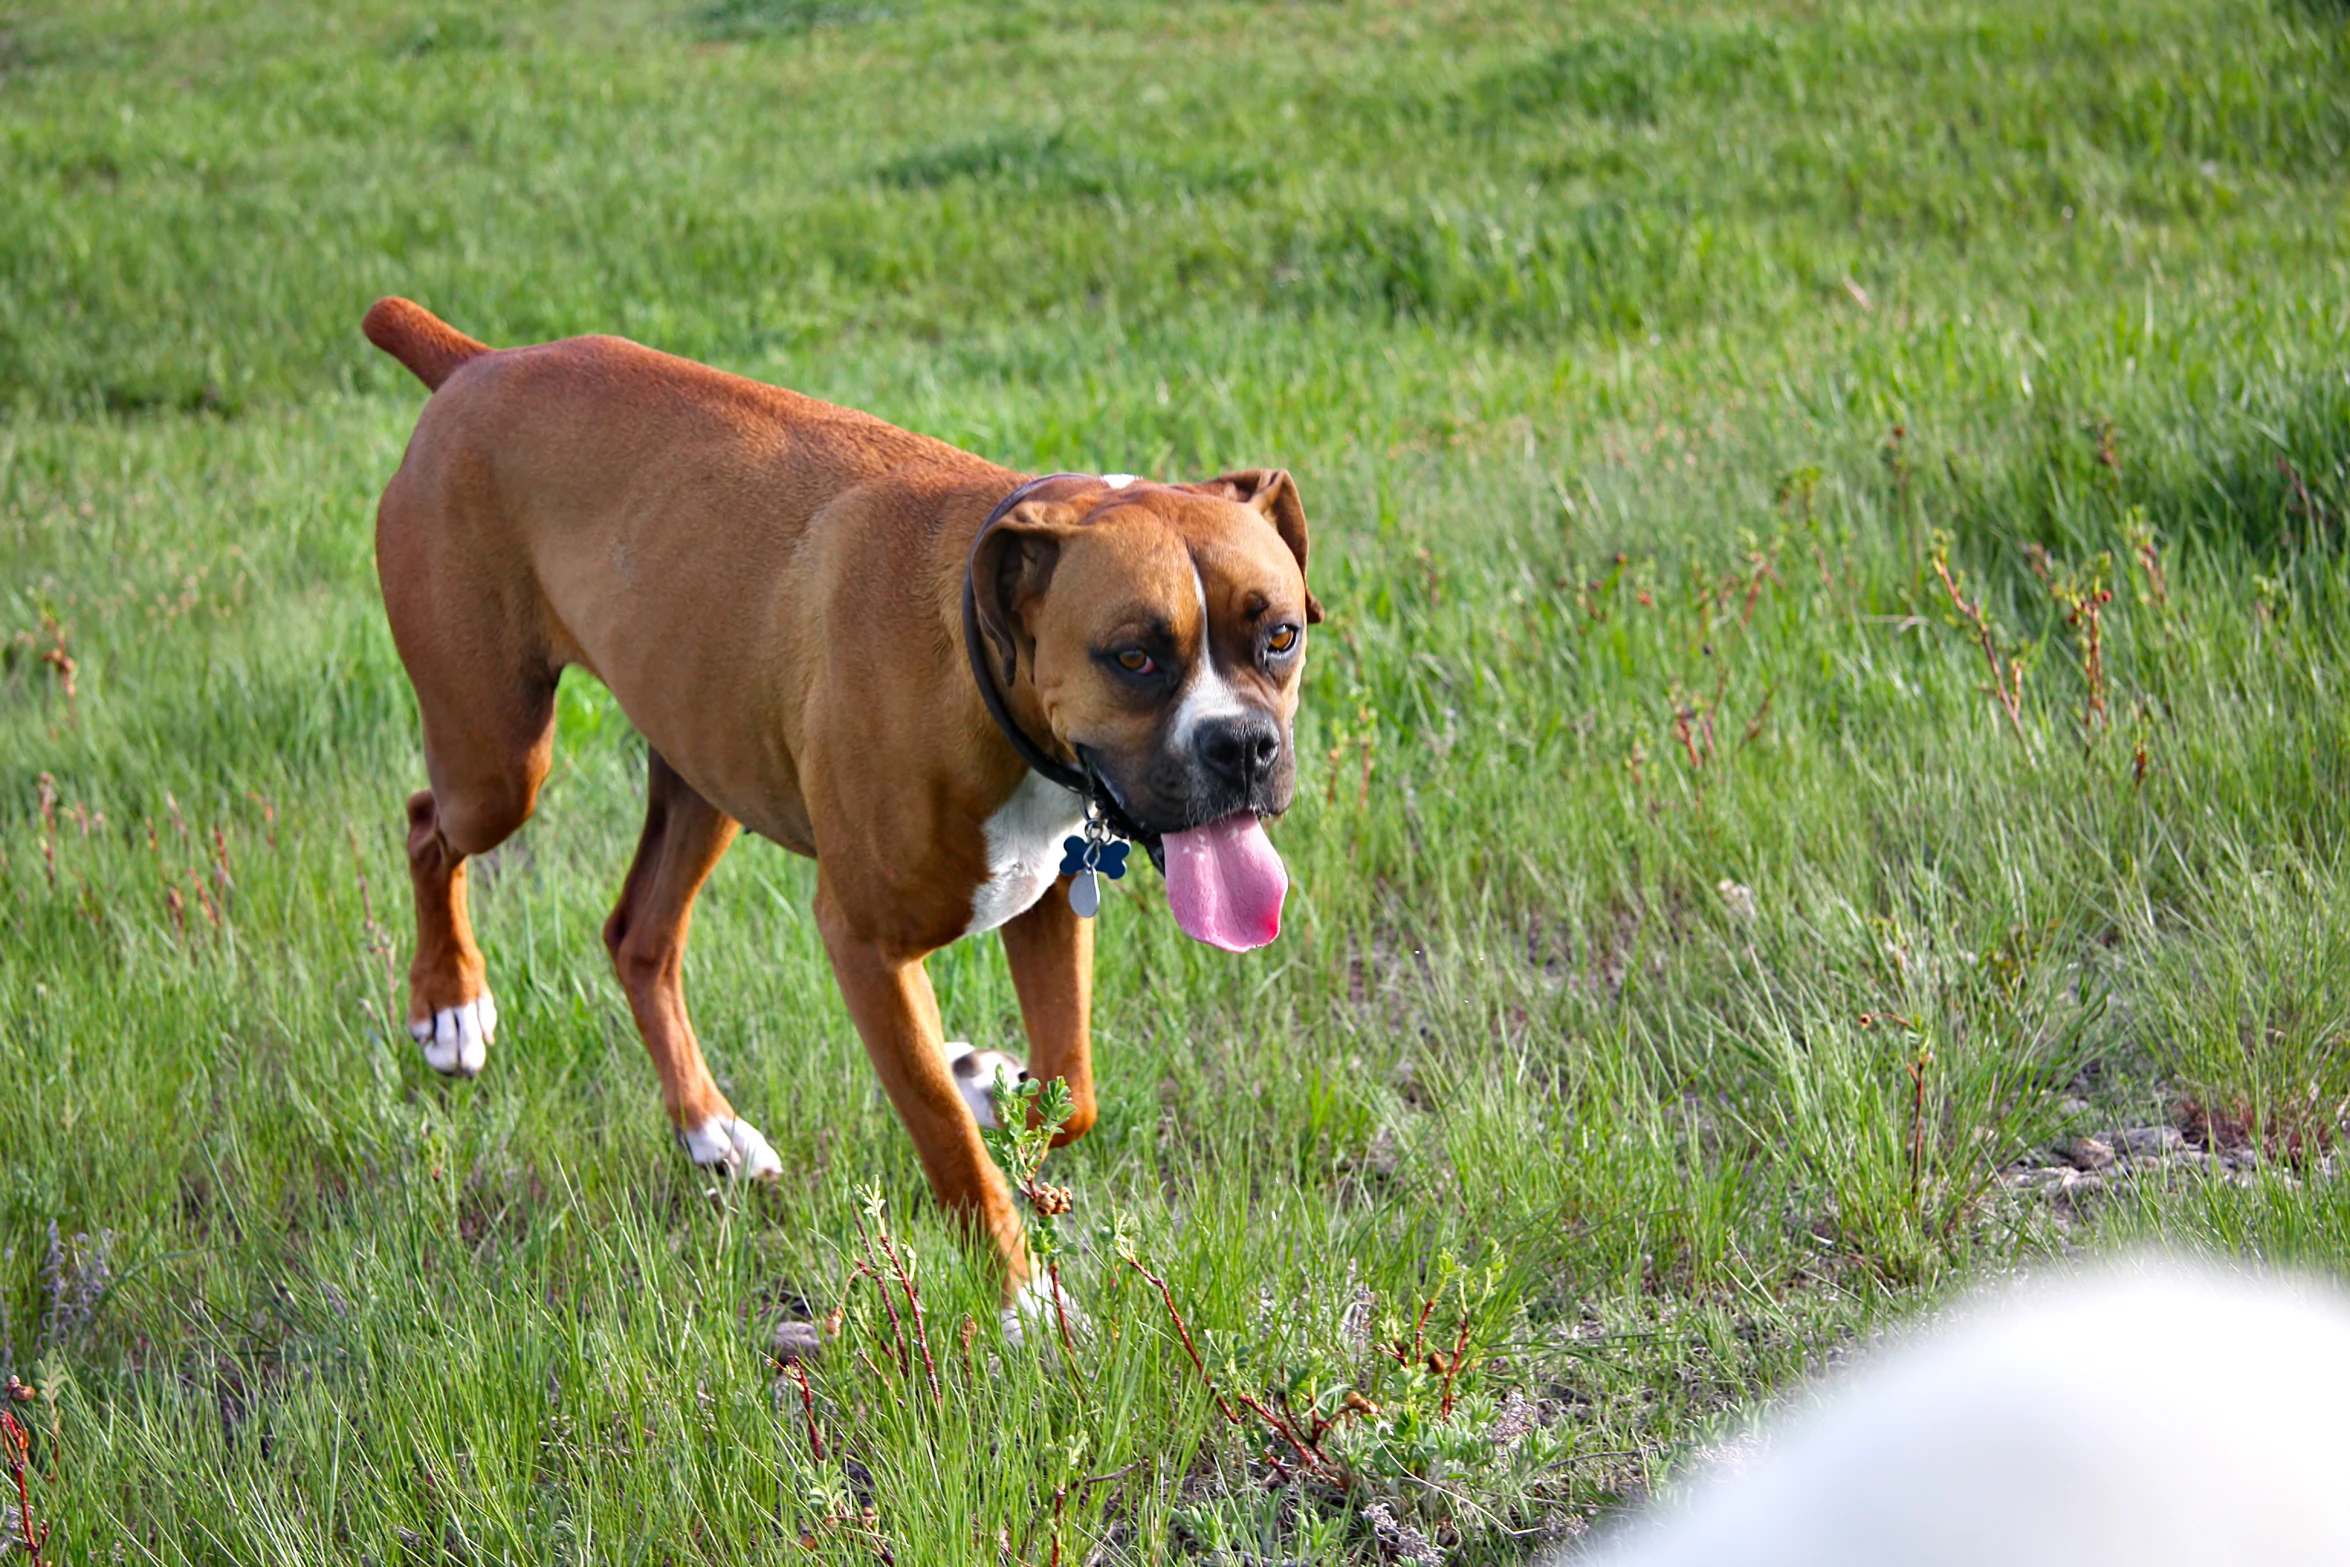 dog with its tongue out running through grassy field